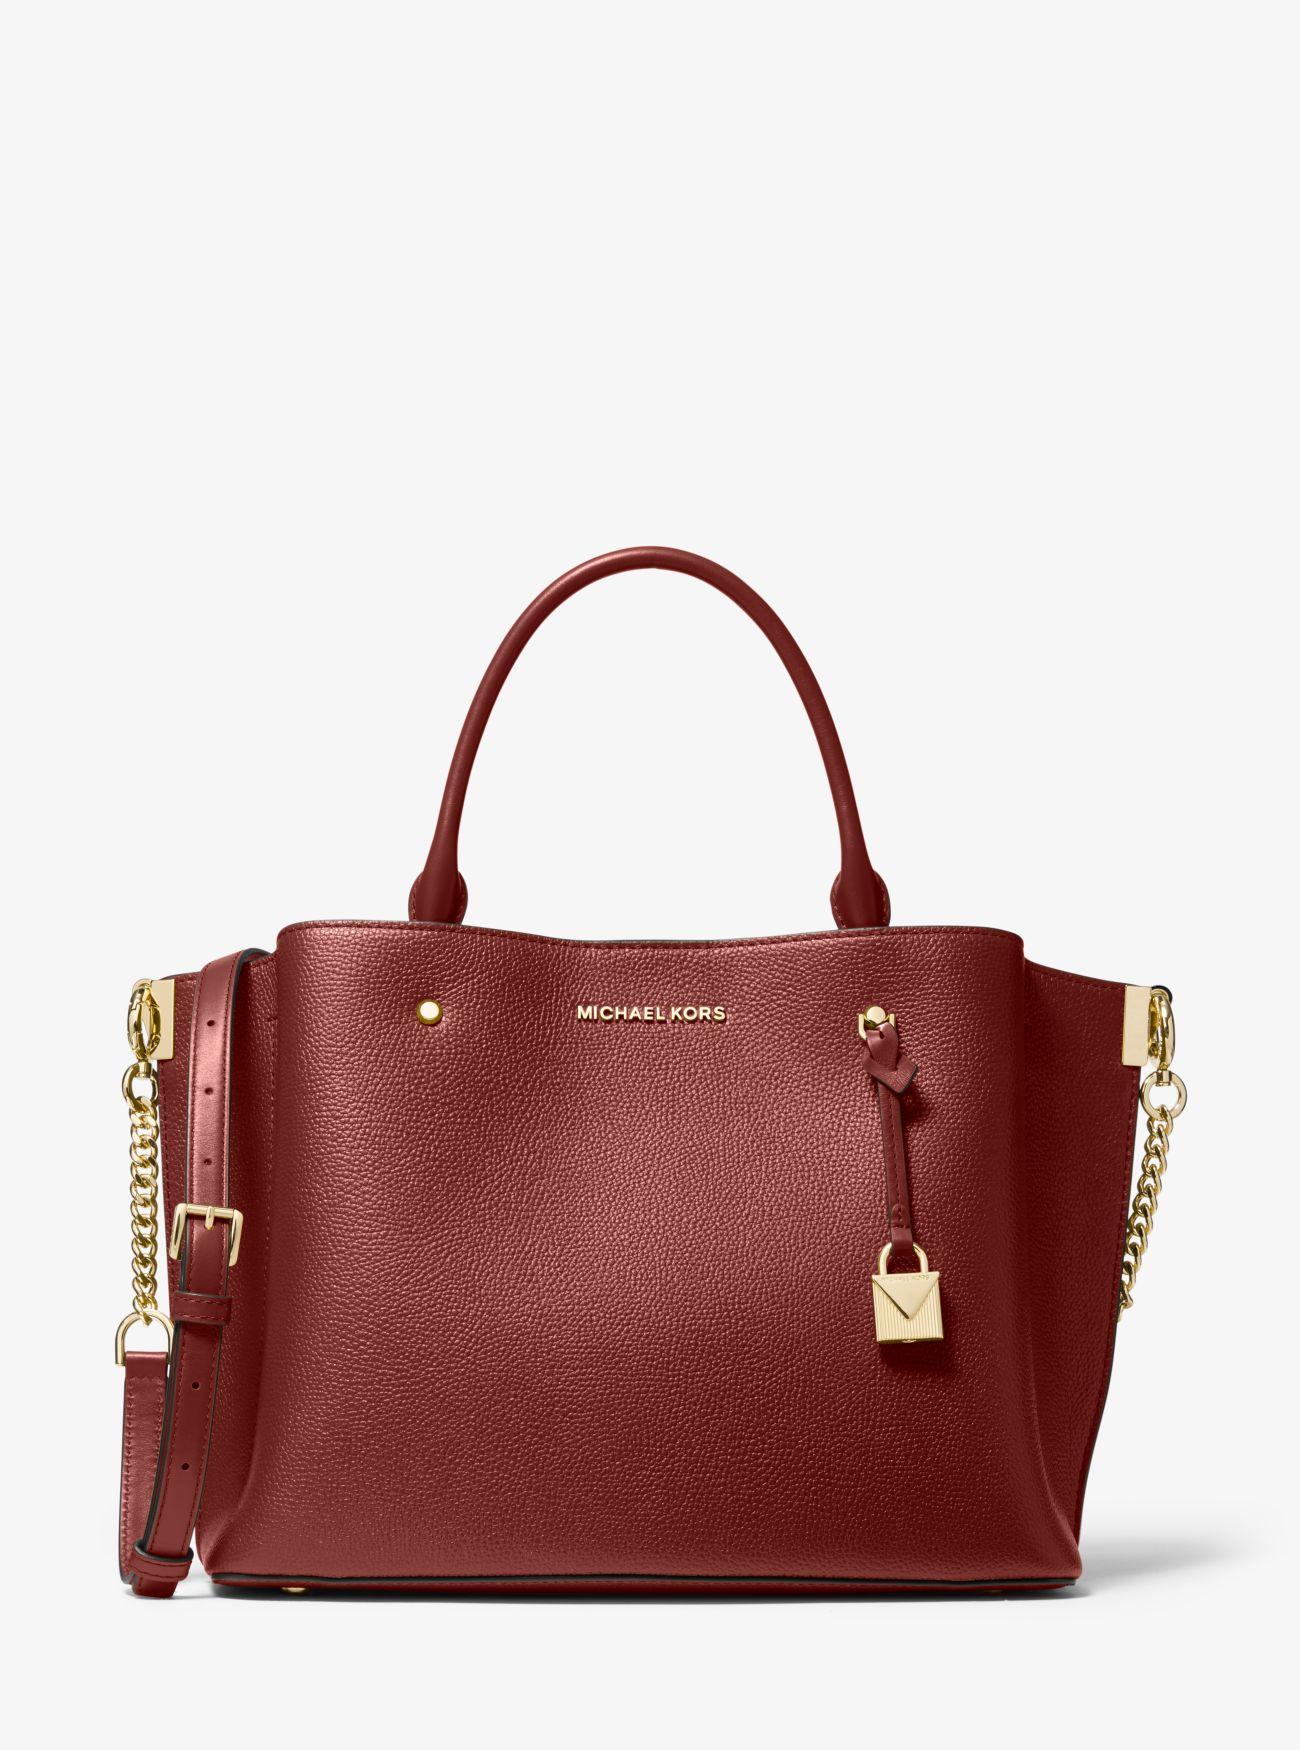 Michael Kors Synthetic Arielle Large Pebbled Leather Satchel - Lyst